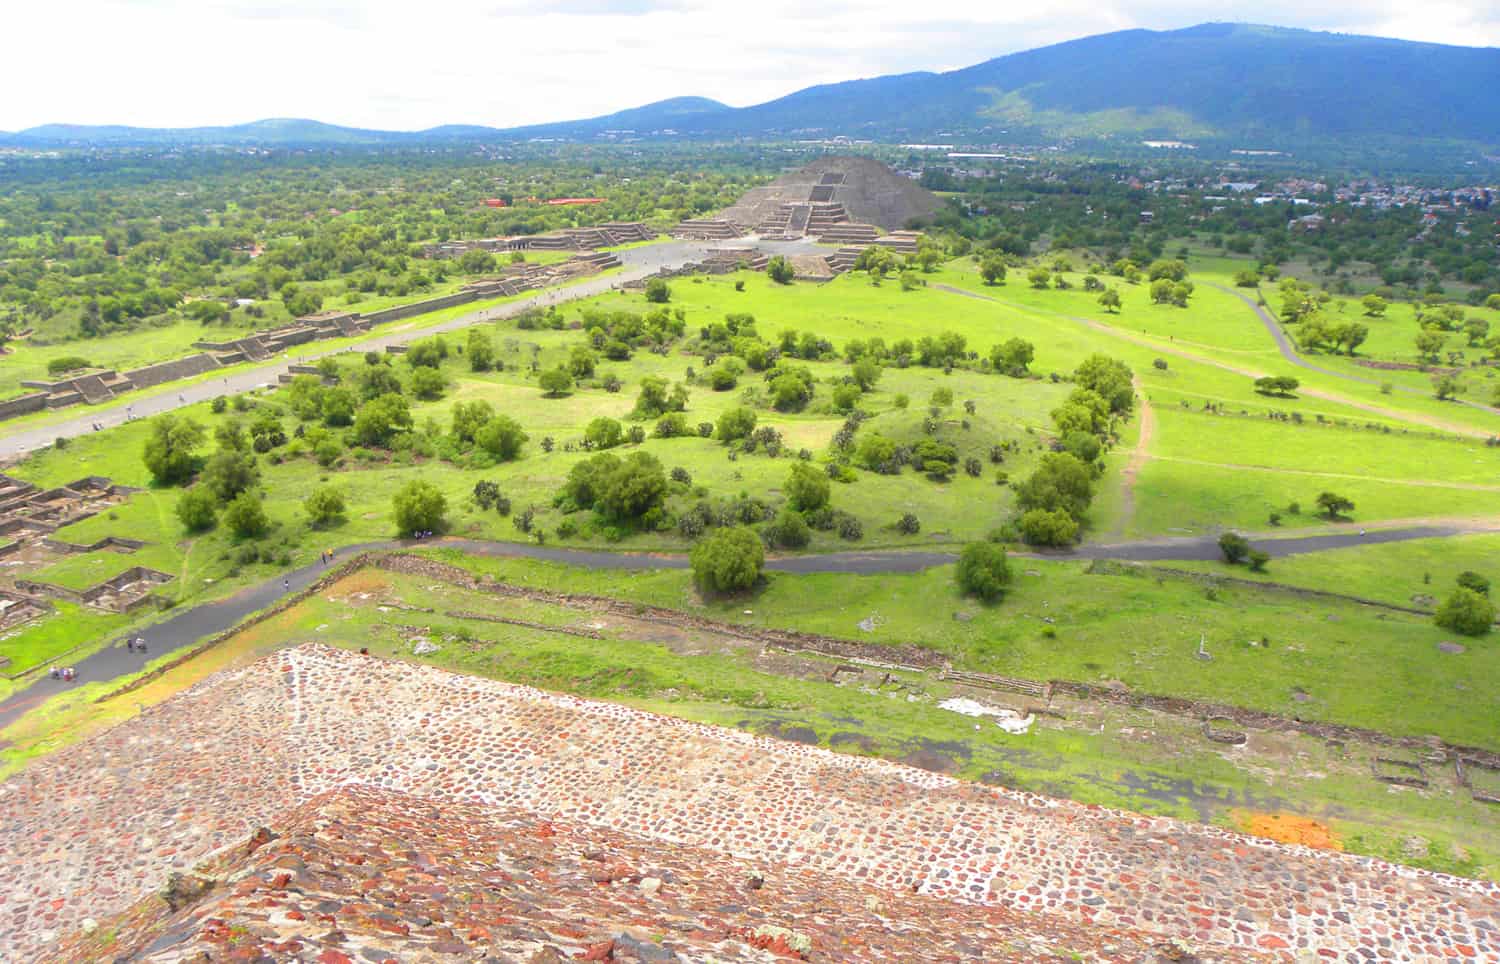 Views from Temple of the Sun, Teotihuacan